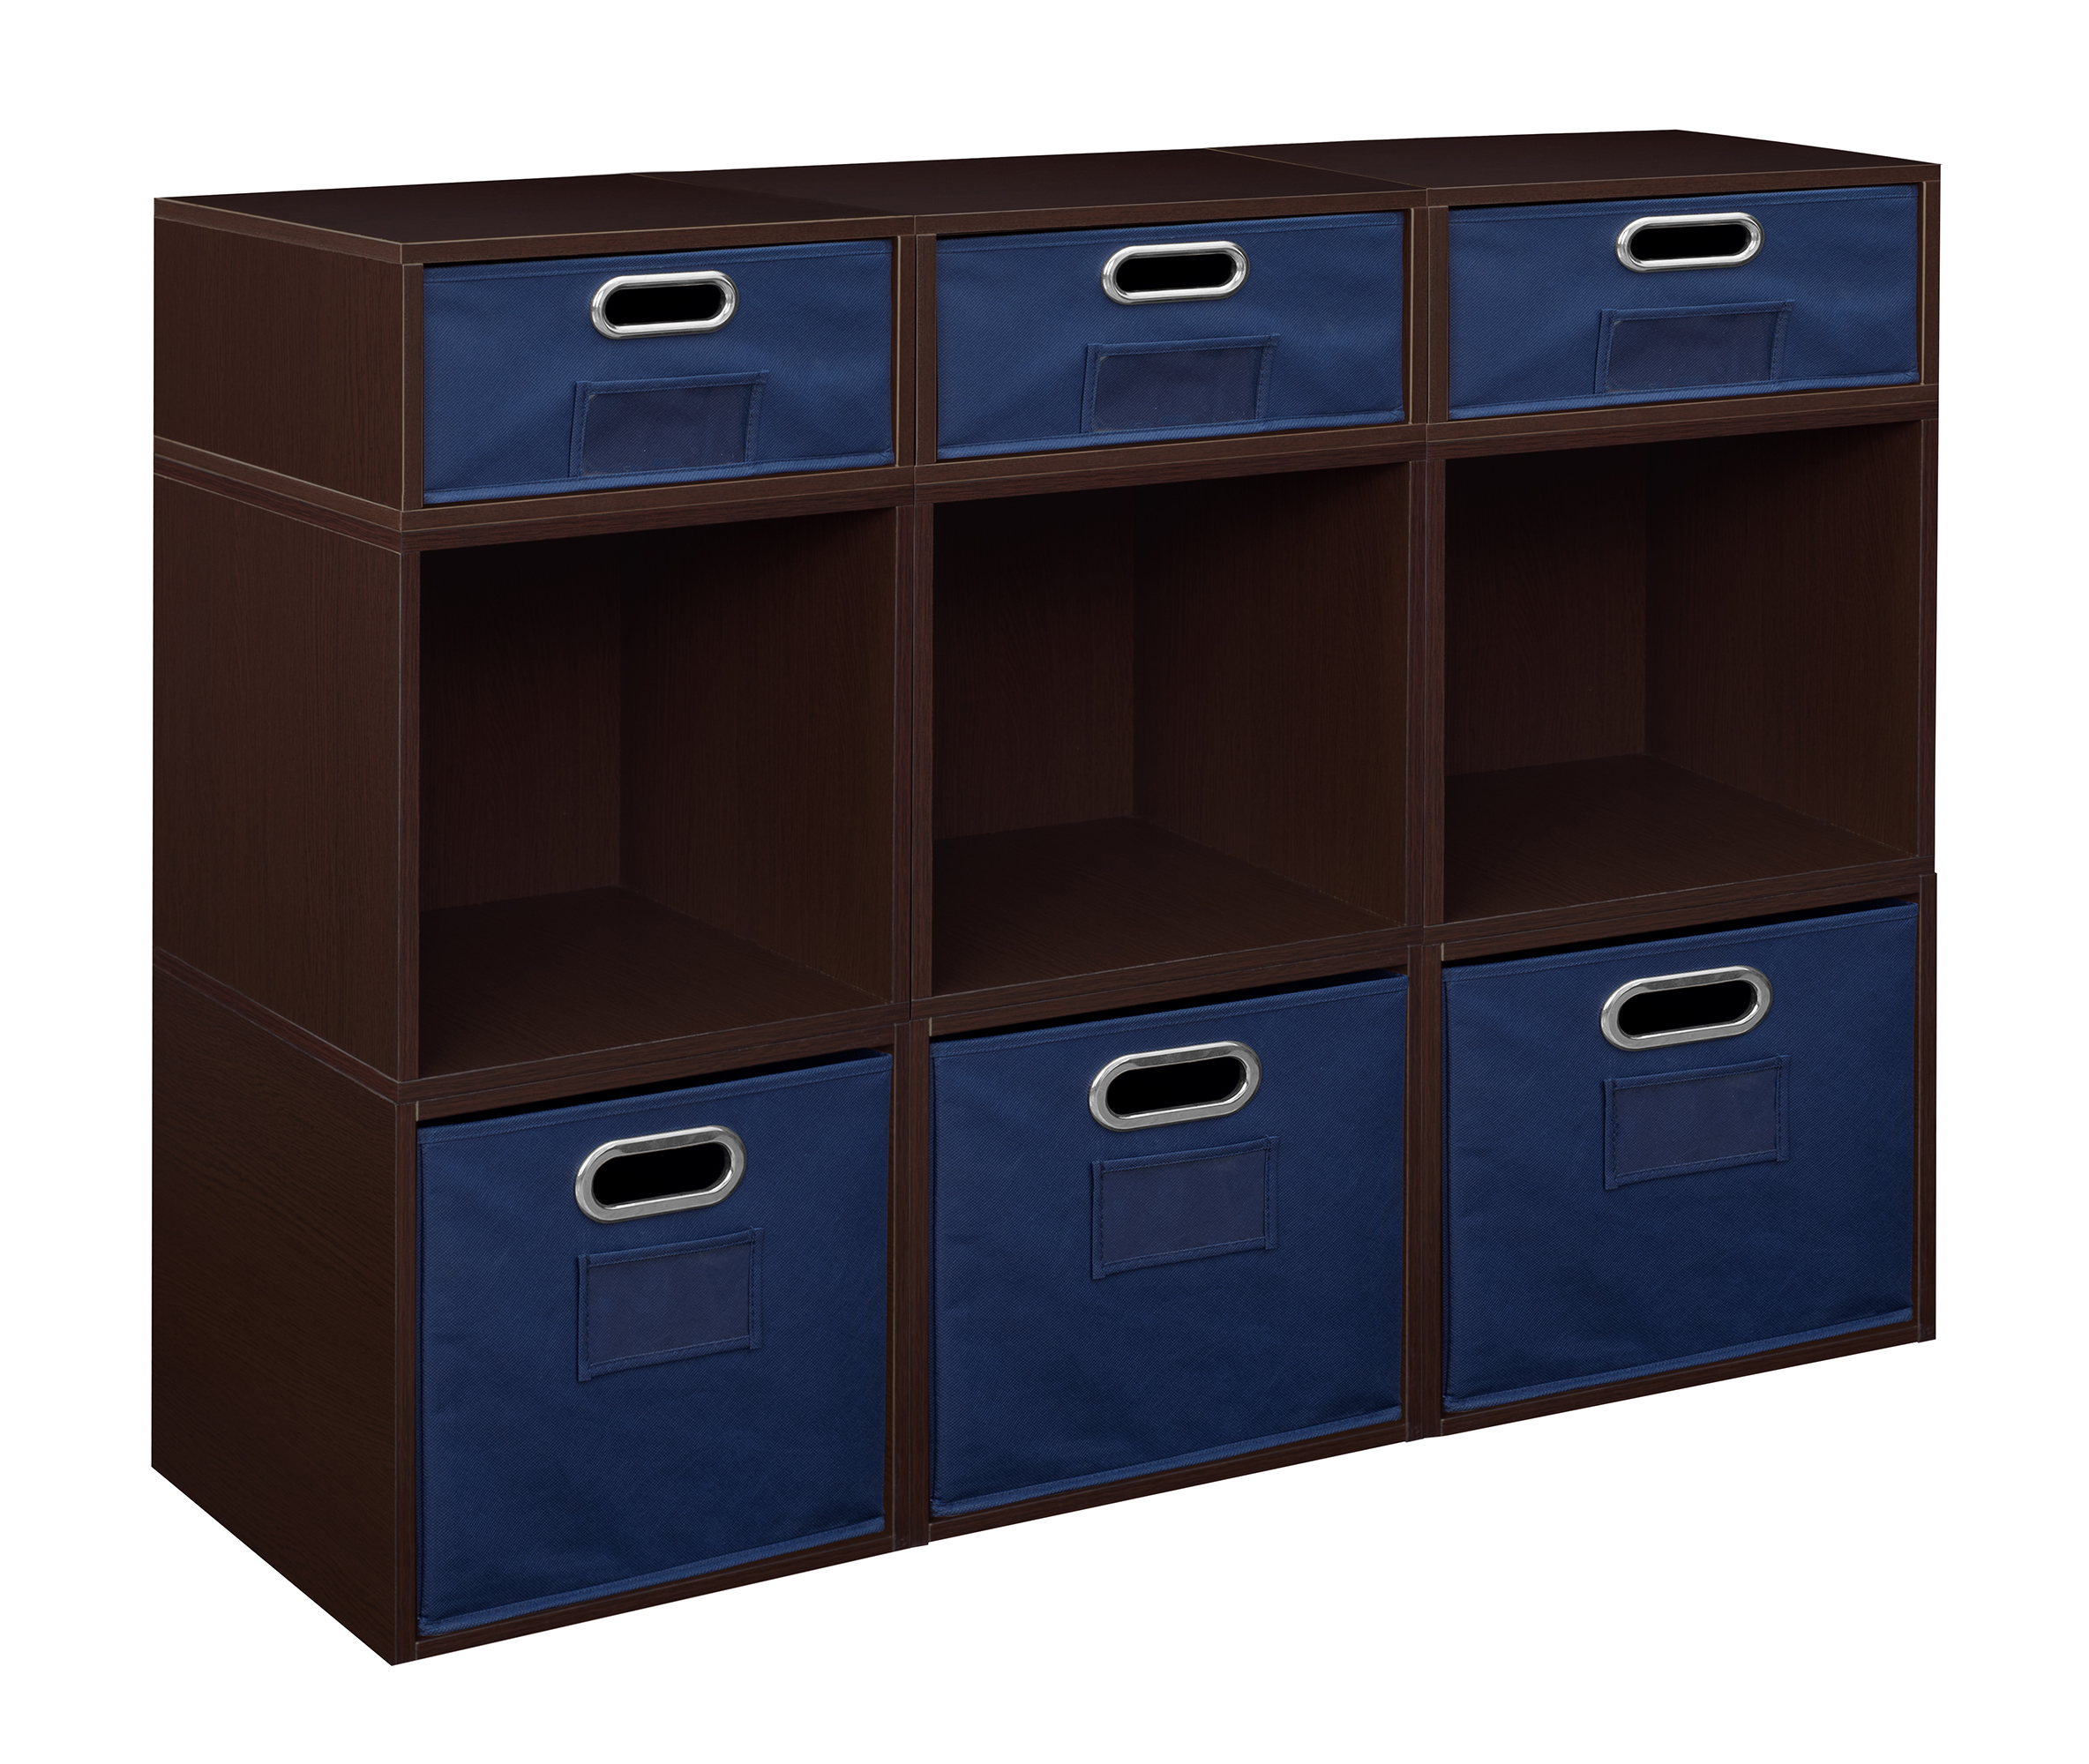 Niche Cubo Storage Set- 6 Full Cubes/3 Half Cubes with Foldable Storage Bins- Truffle/Blue - image 1 of 8